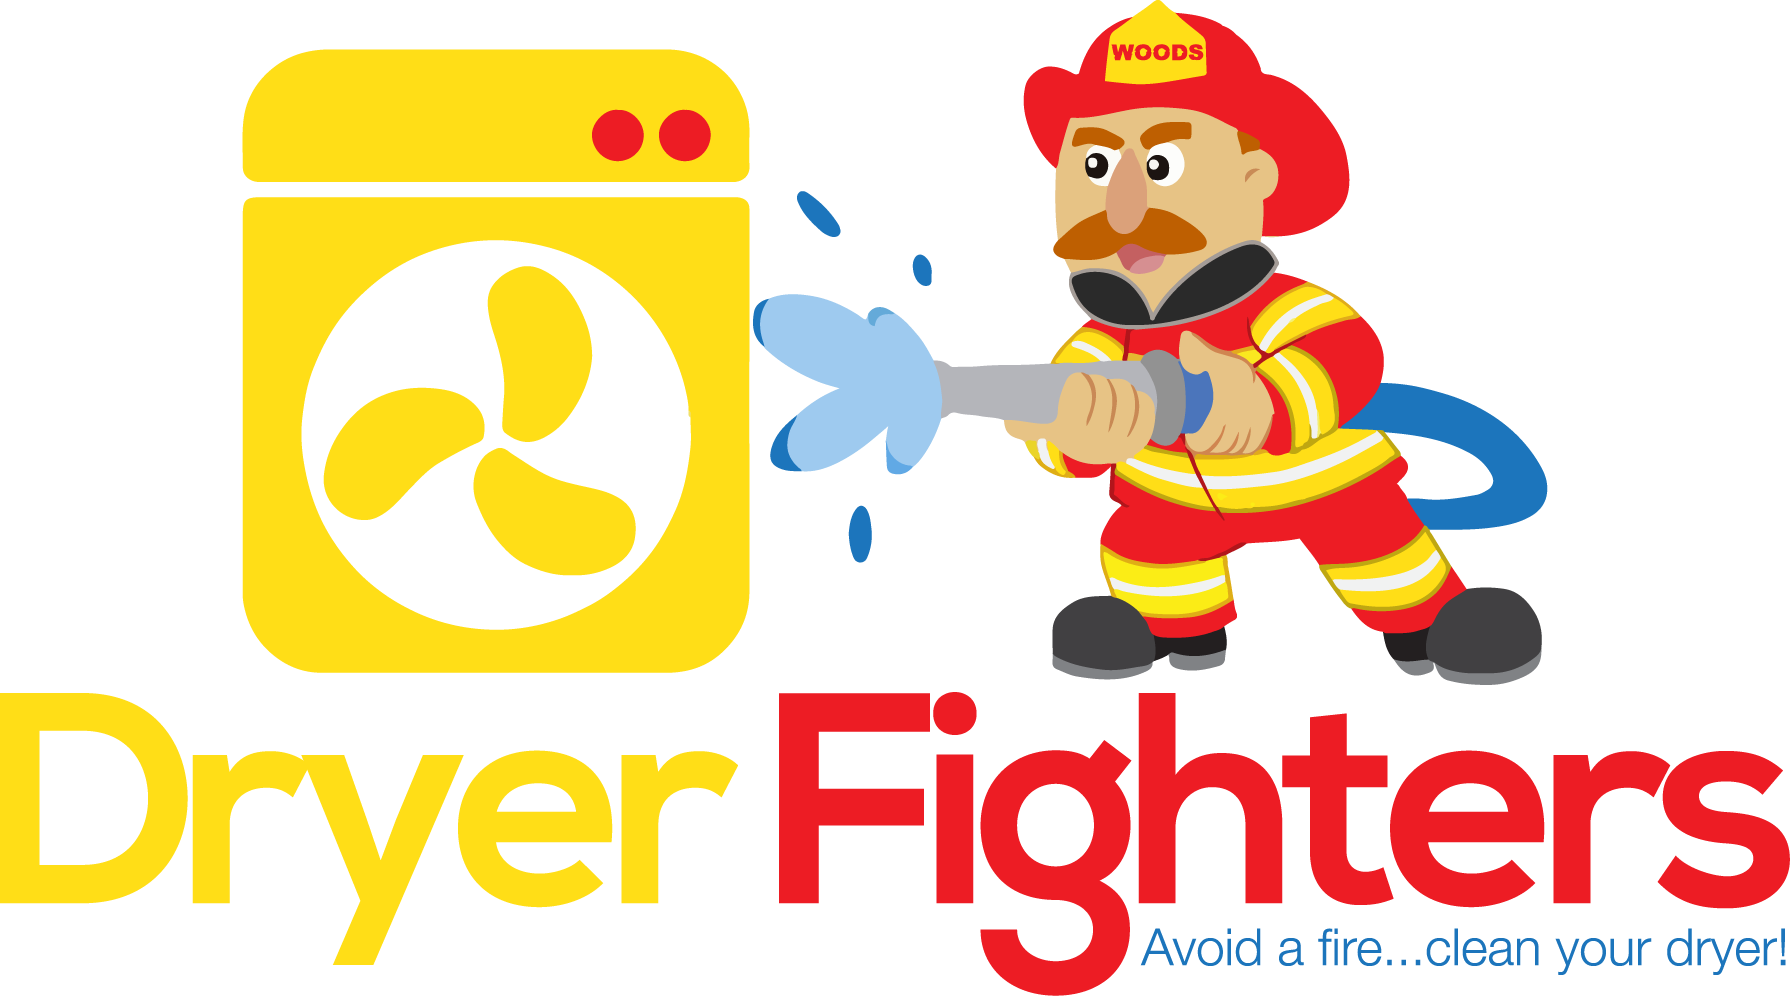 Dryer Fighters